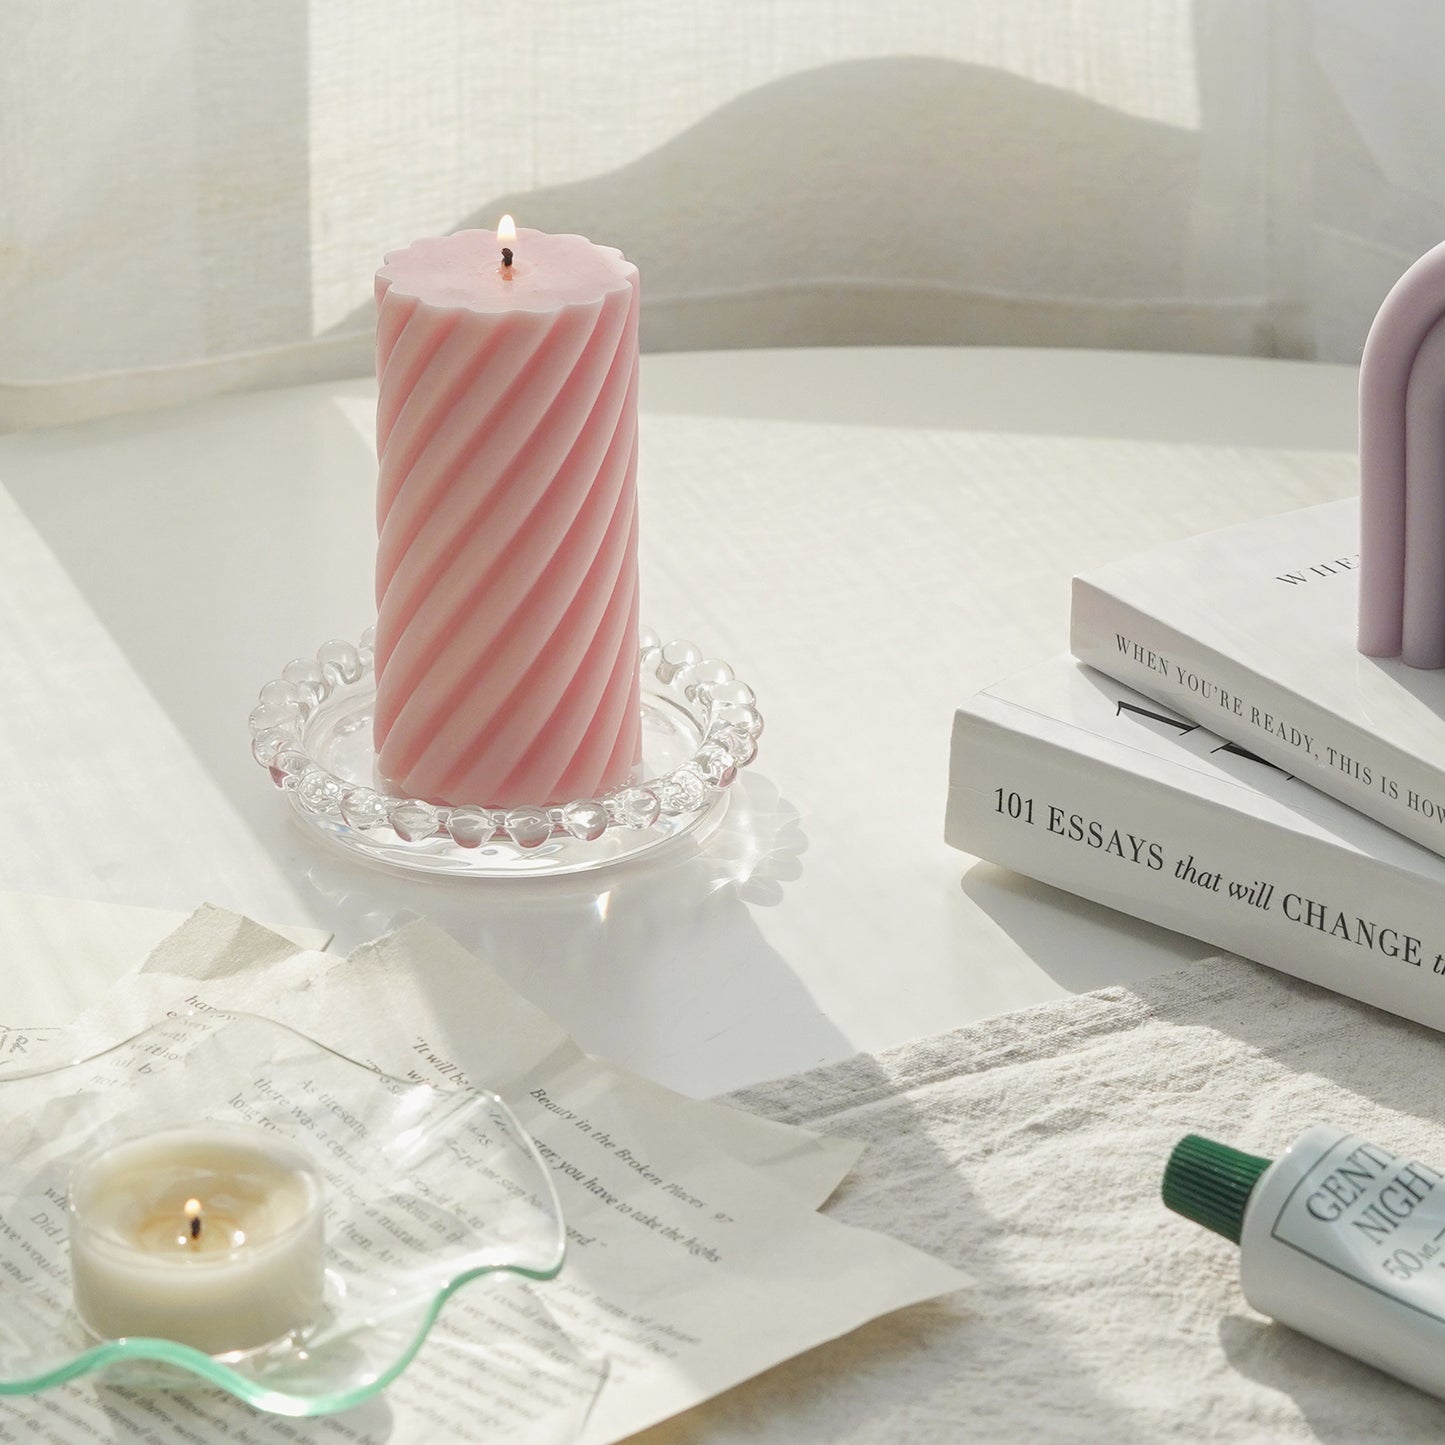 a lit blush pink sipral pillar soy candle on a clear mini beaded tray, a lit tealight candle in a ruffle dish, book pages, hand lotion, and lavender rainbow shape pillar candle on white books